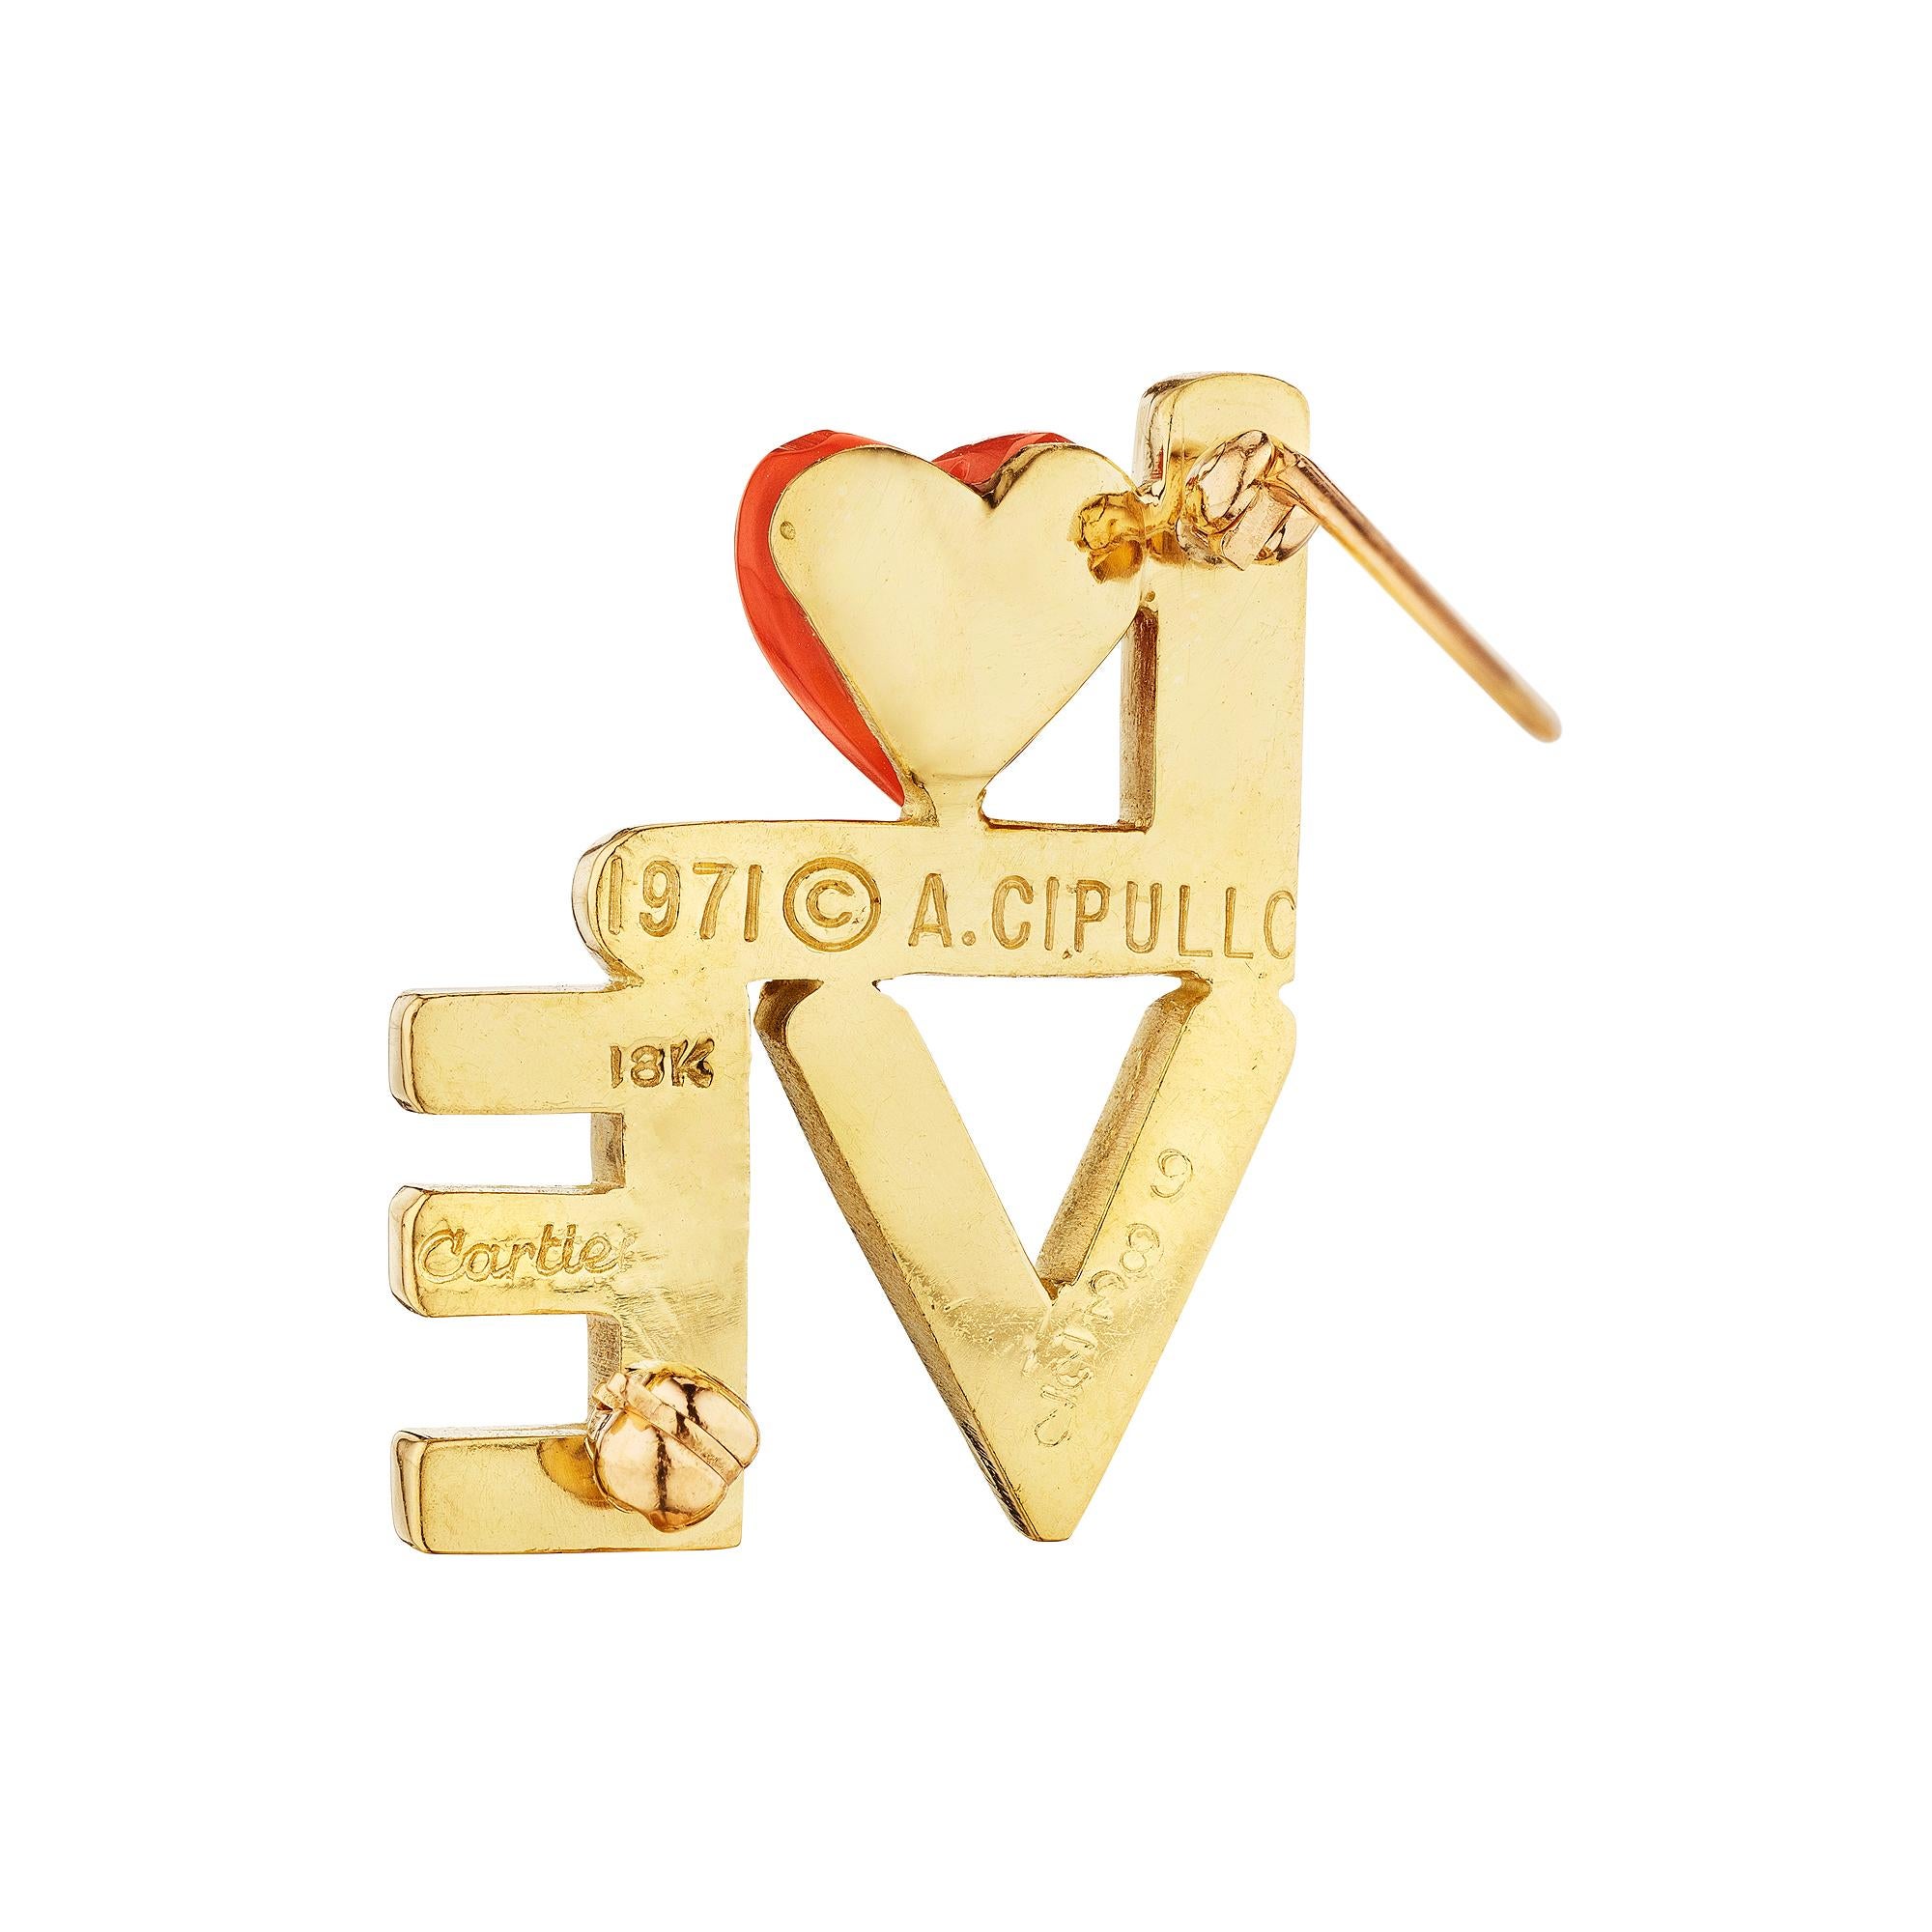 Wear love every day with this collectible Aldo Cipullo for Cartier modernist coral and 18 karat yellow gold brooch.  With a hand-carved coral heart sitting atop block letters spelling the precious word LOVE, this romantically designed pin is pure